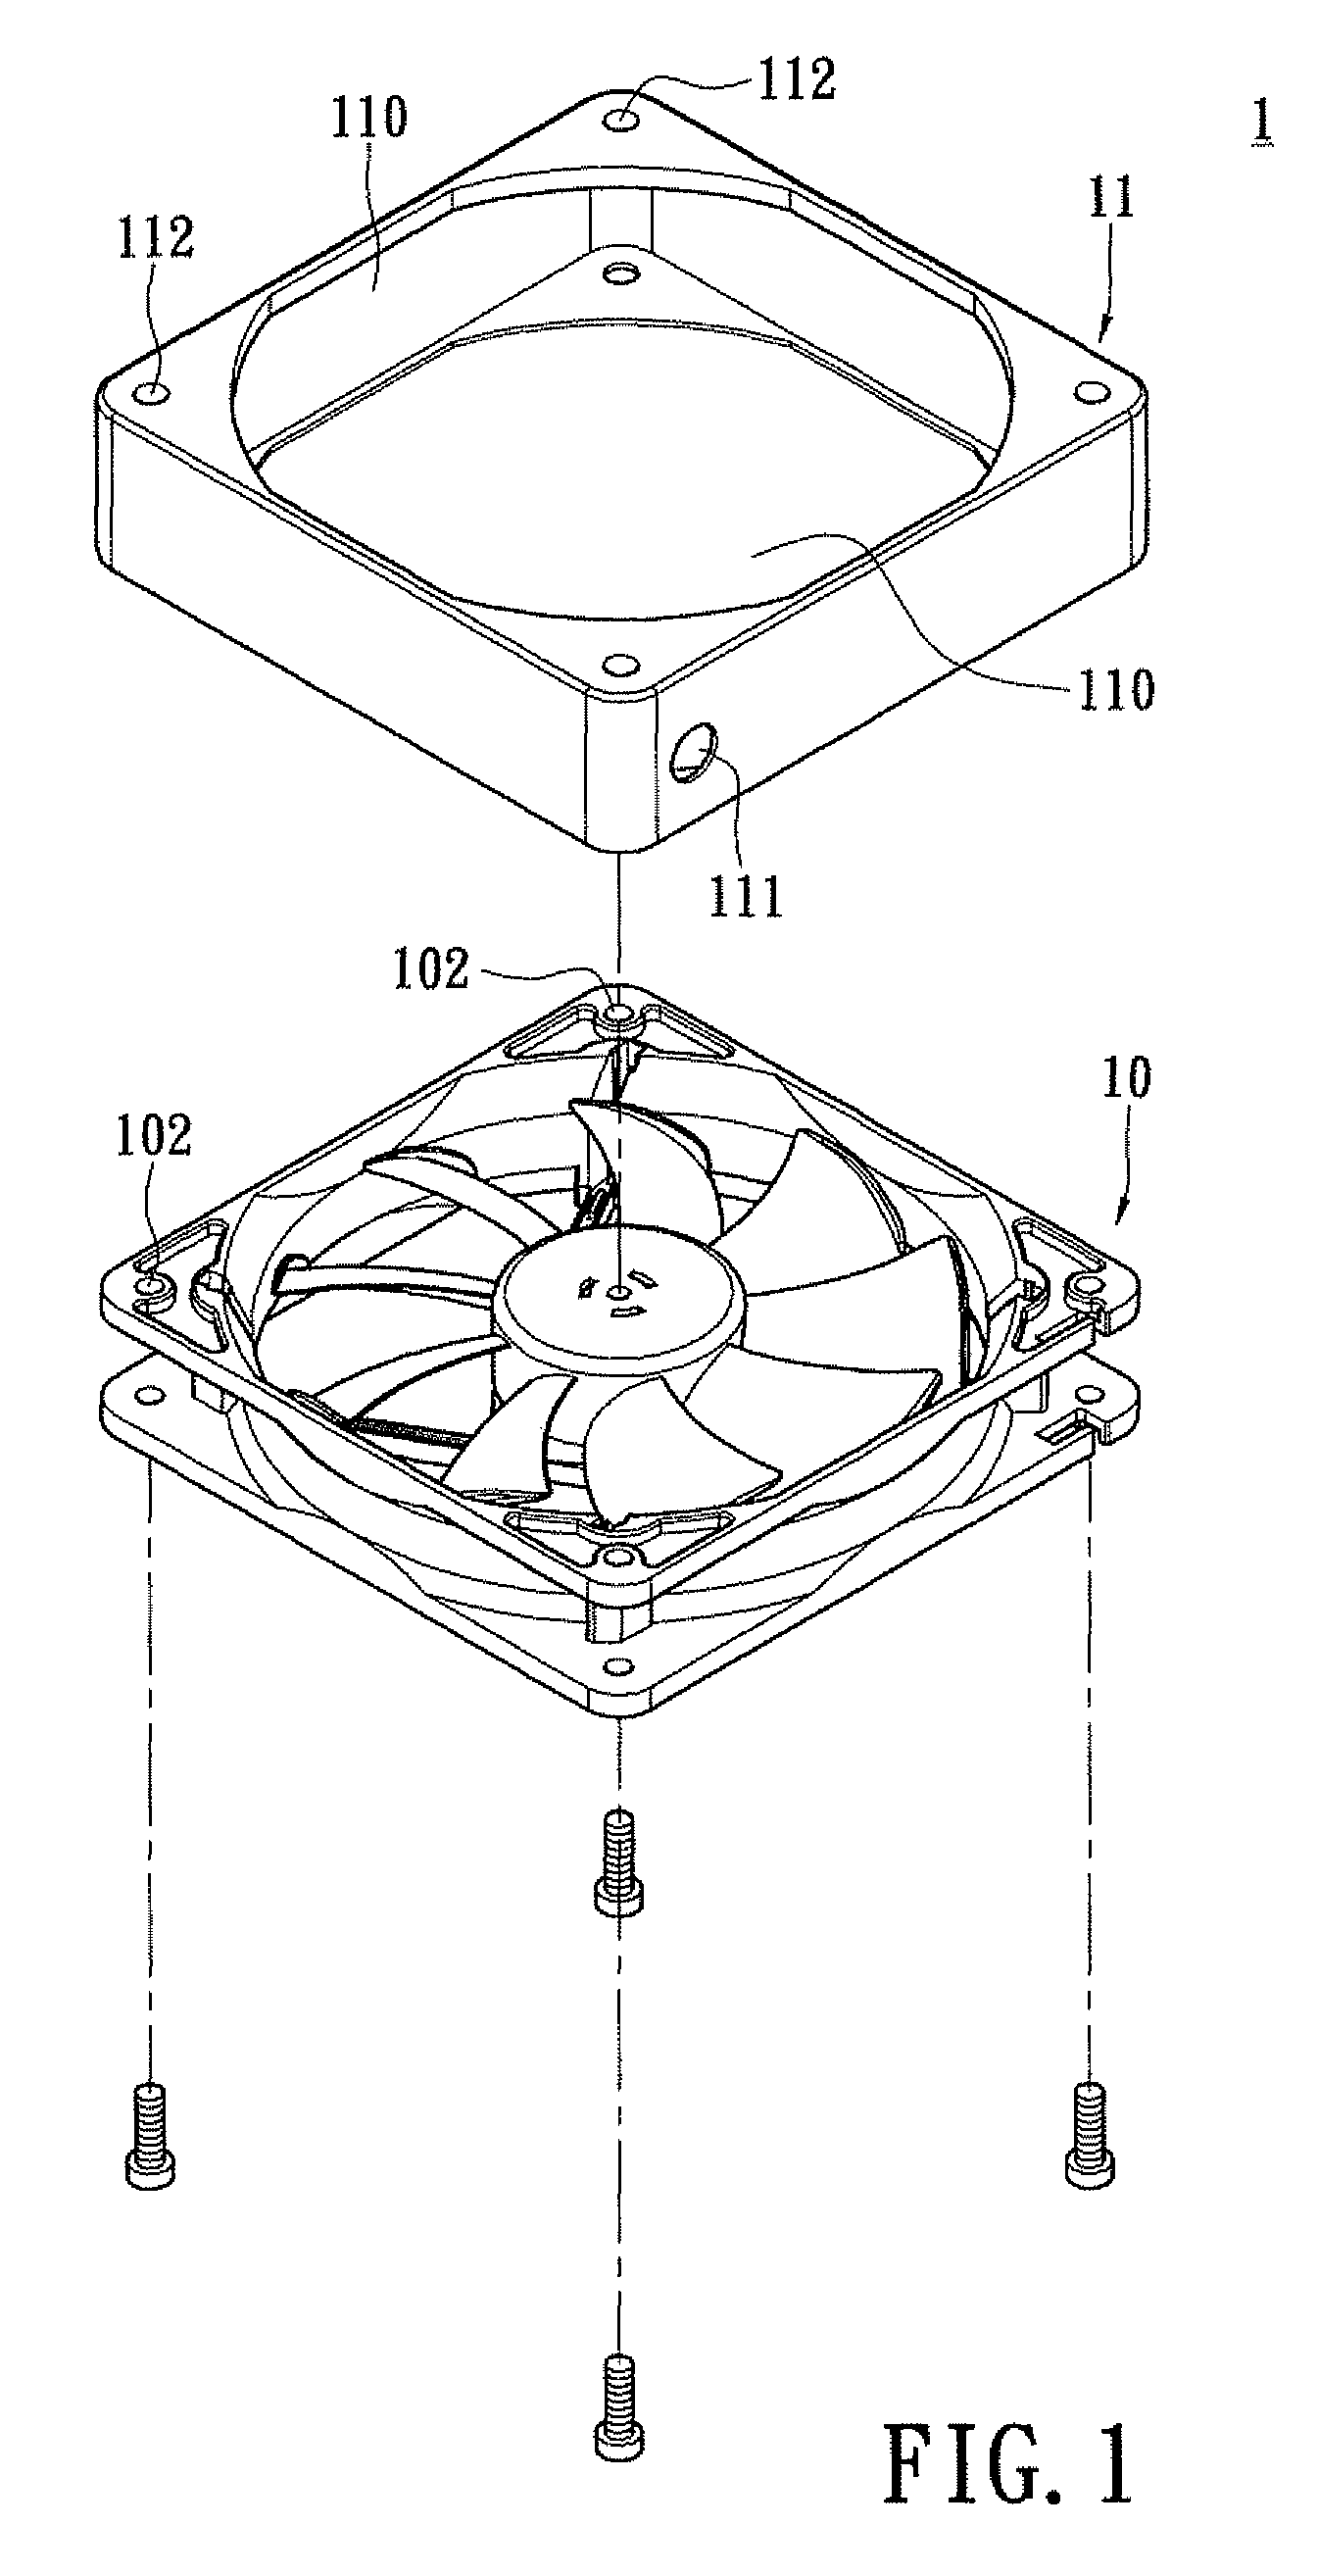 Fan device with a vibration attenuating structure